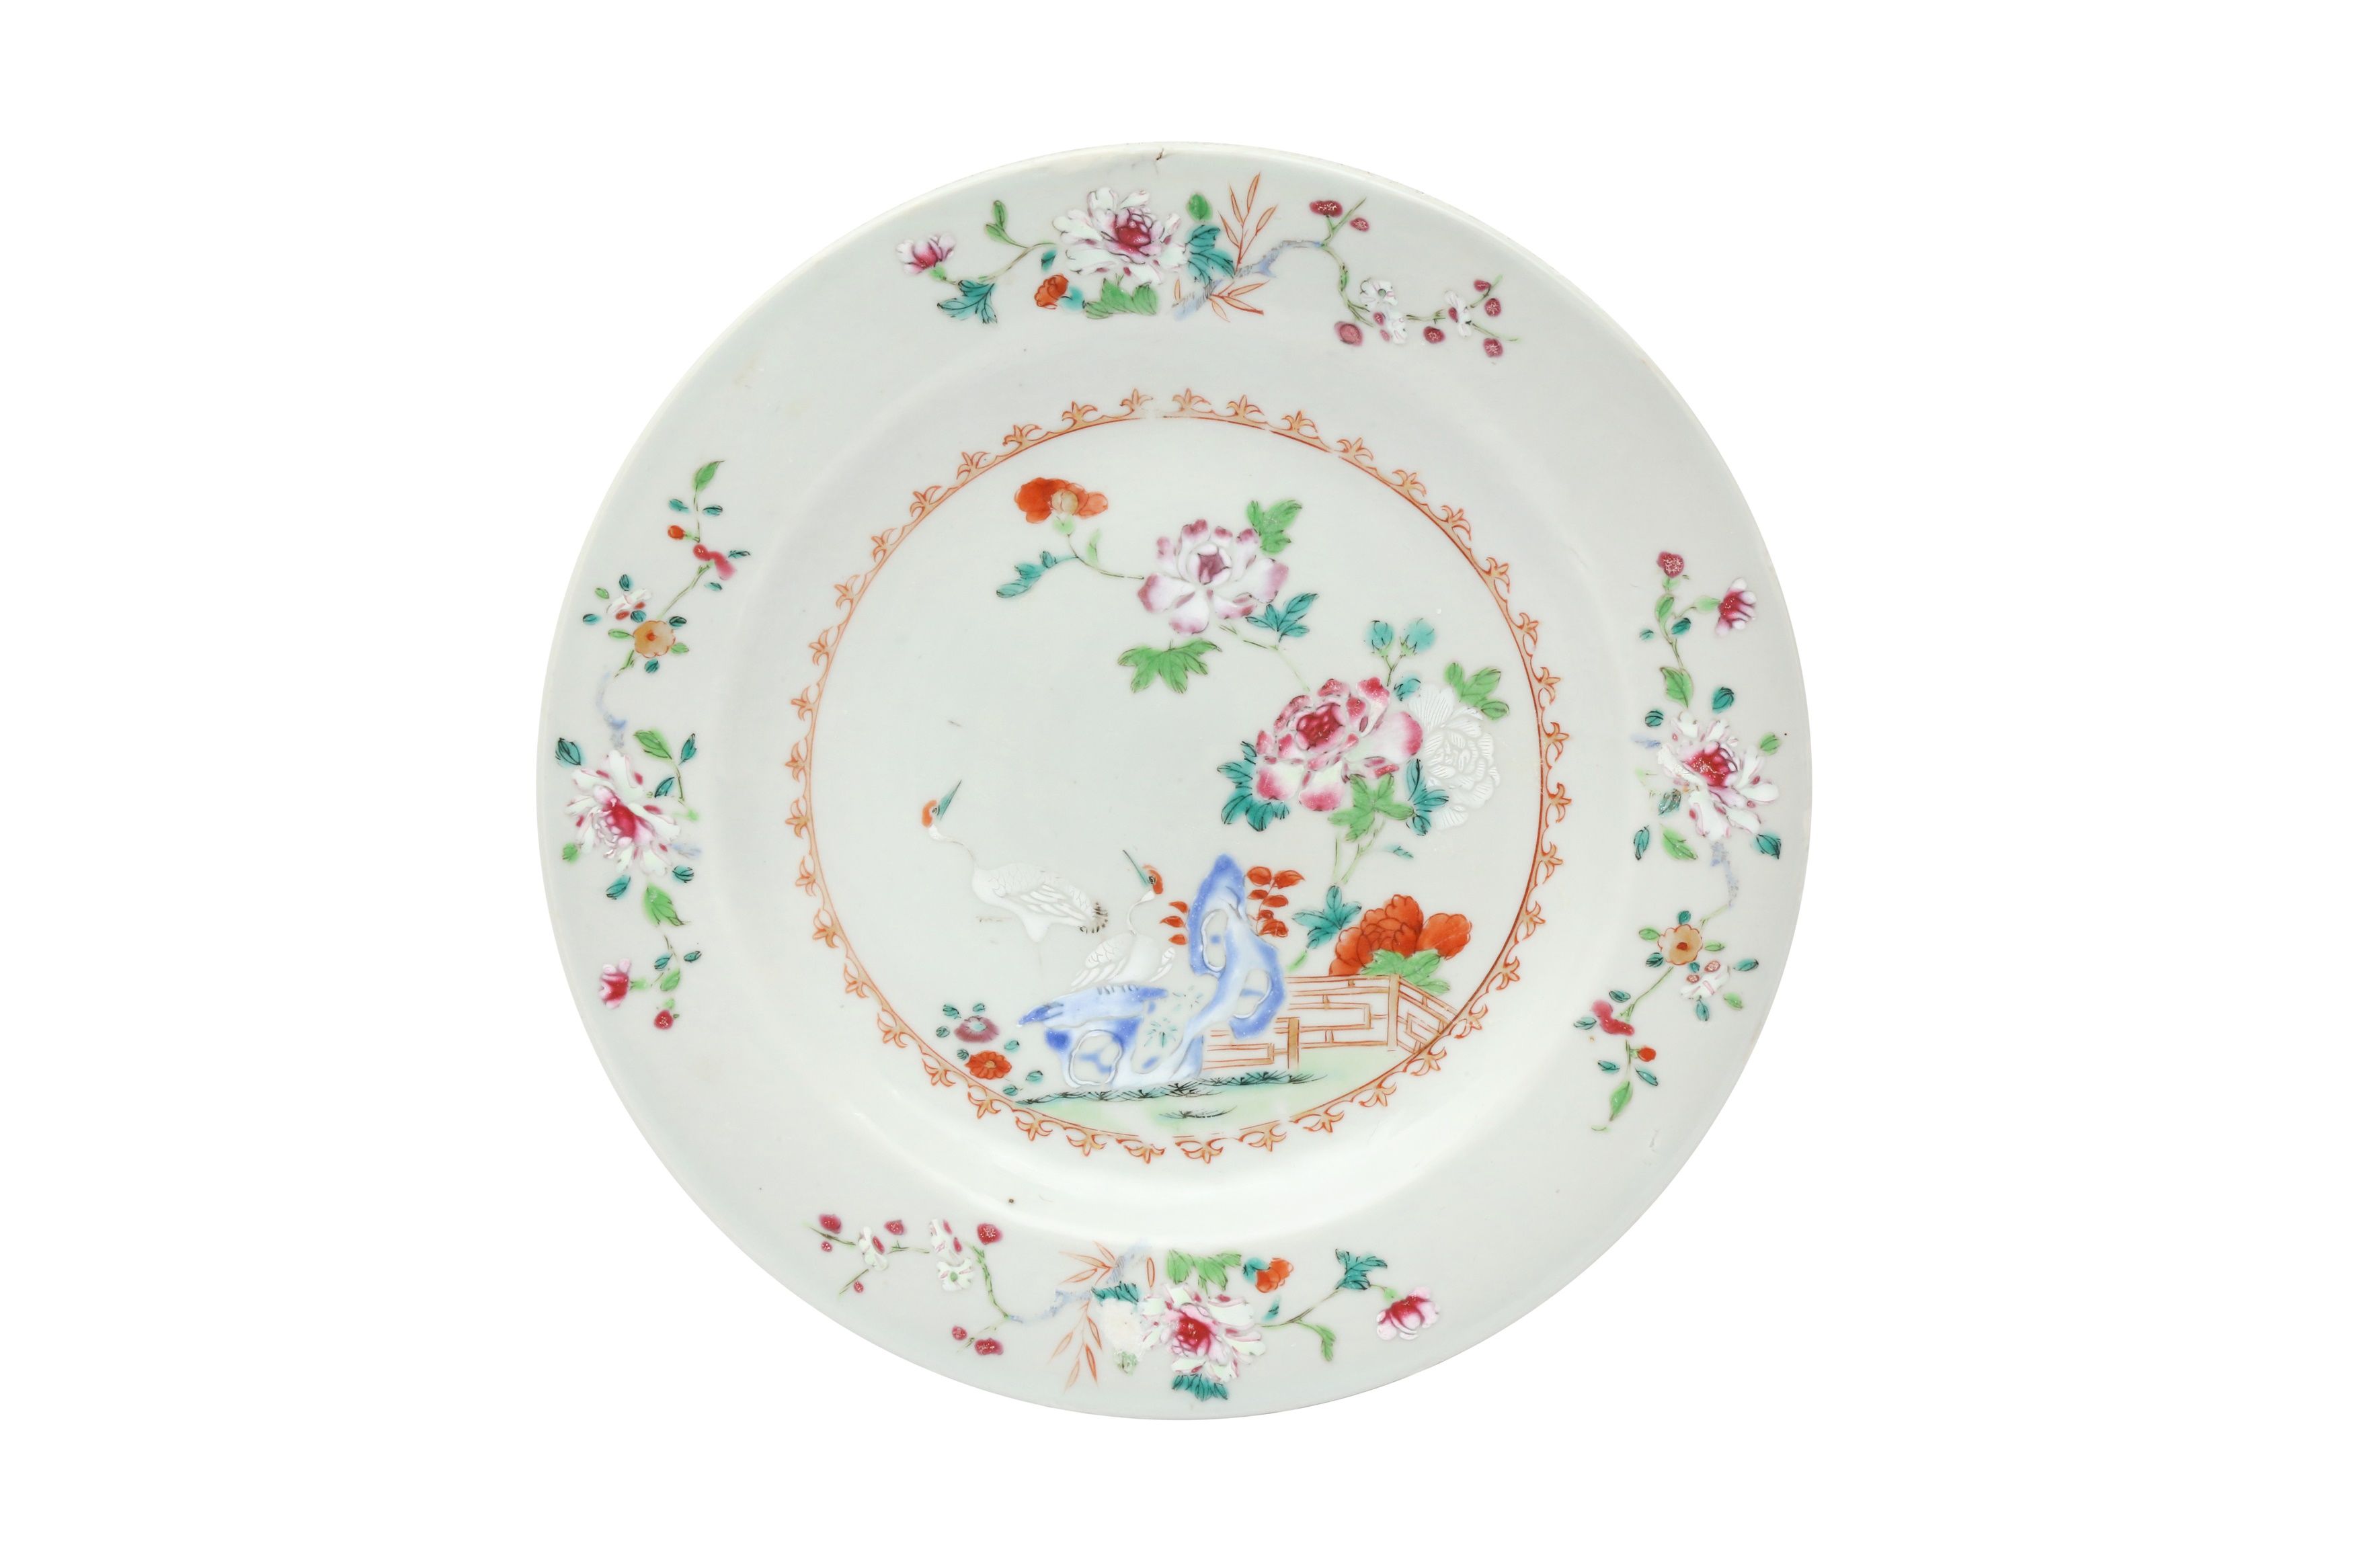 TWO CHINESE EXPORT FAMILLE-ROSE 'CRANES AND BLOSSOMS' DISHES 清十八世紀 外銷粉彩牡丹鶴紋盤兩件 - Image 2 of 15